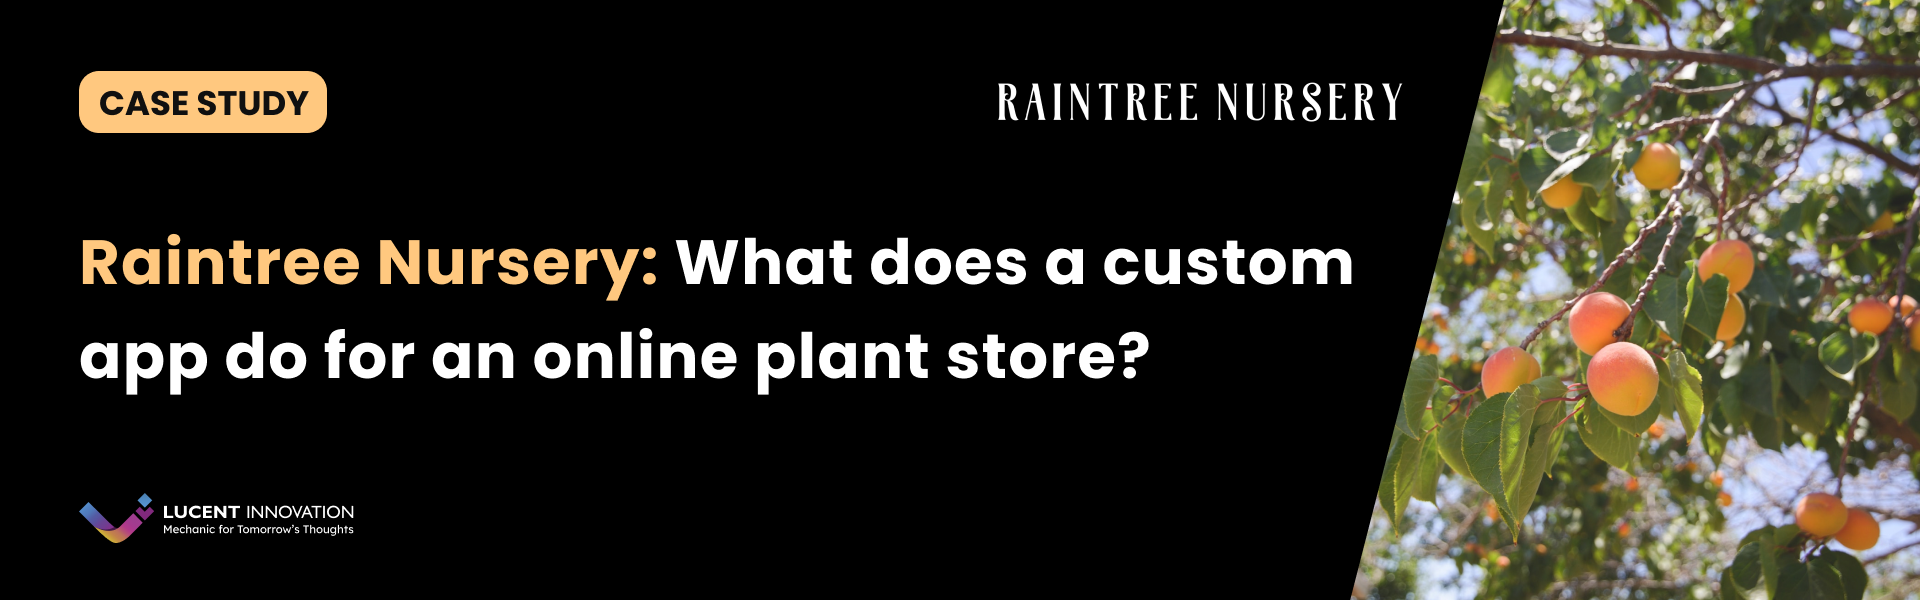 Raintree Nursery: What does a custom app do for an online plant store?